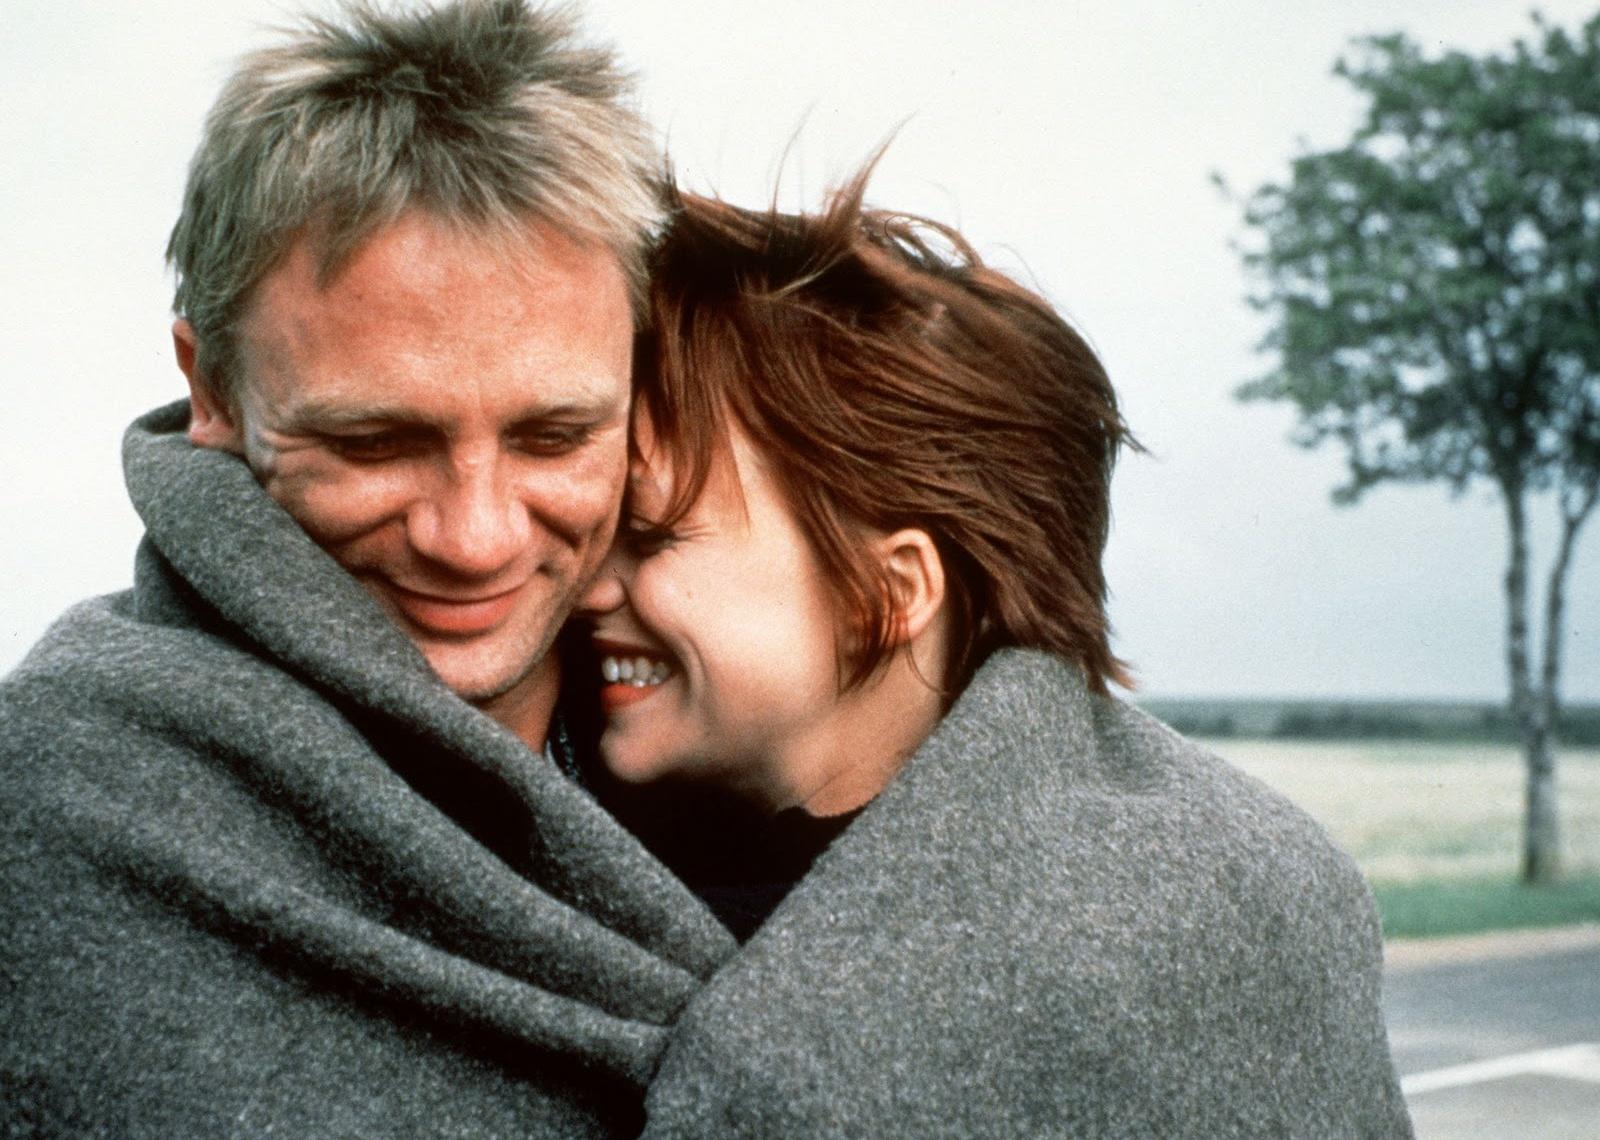 Daniel Craig and a woman with short red hair snuggling outside in a gray blanket.